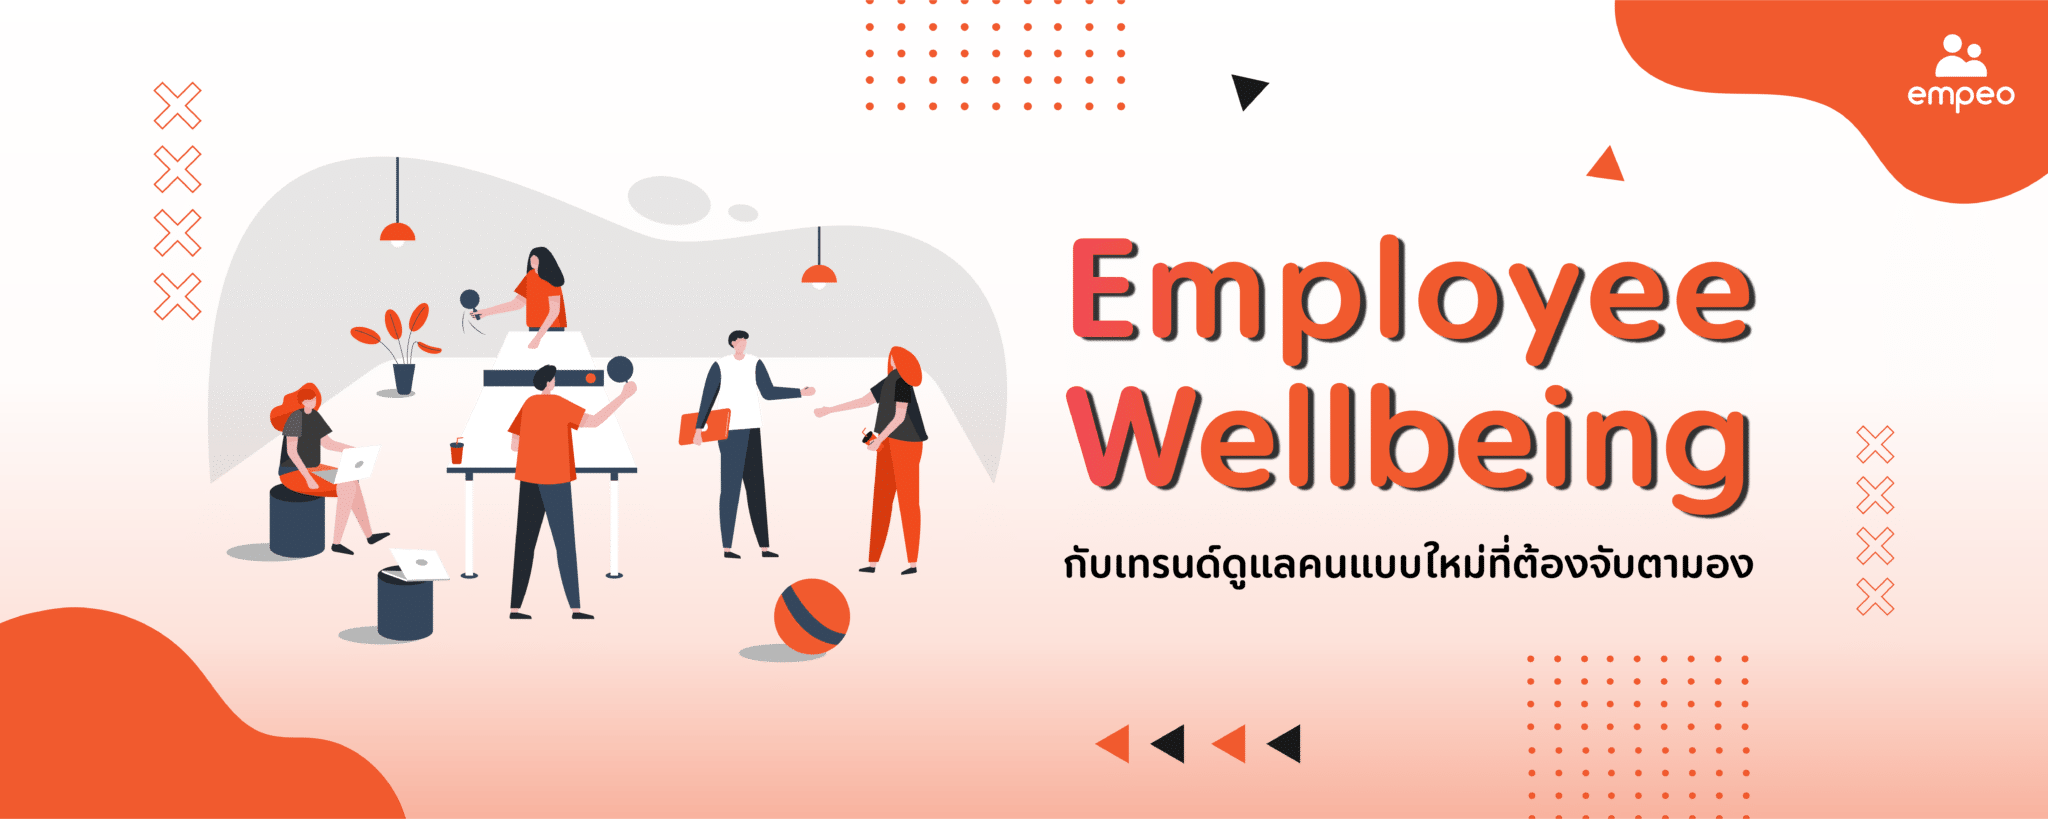 employee wellbeing image with people cooperating